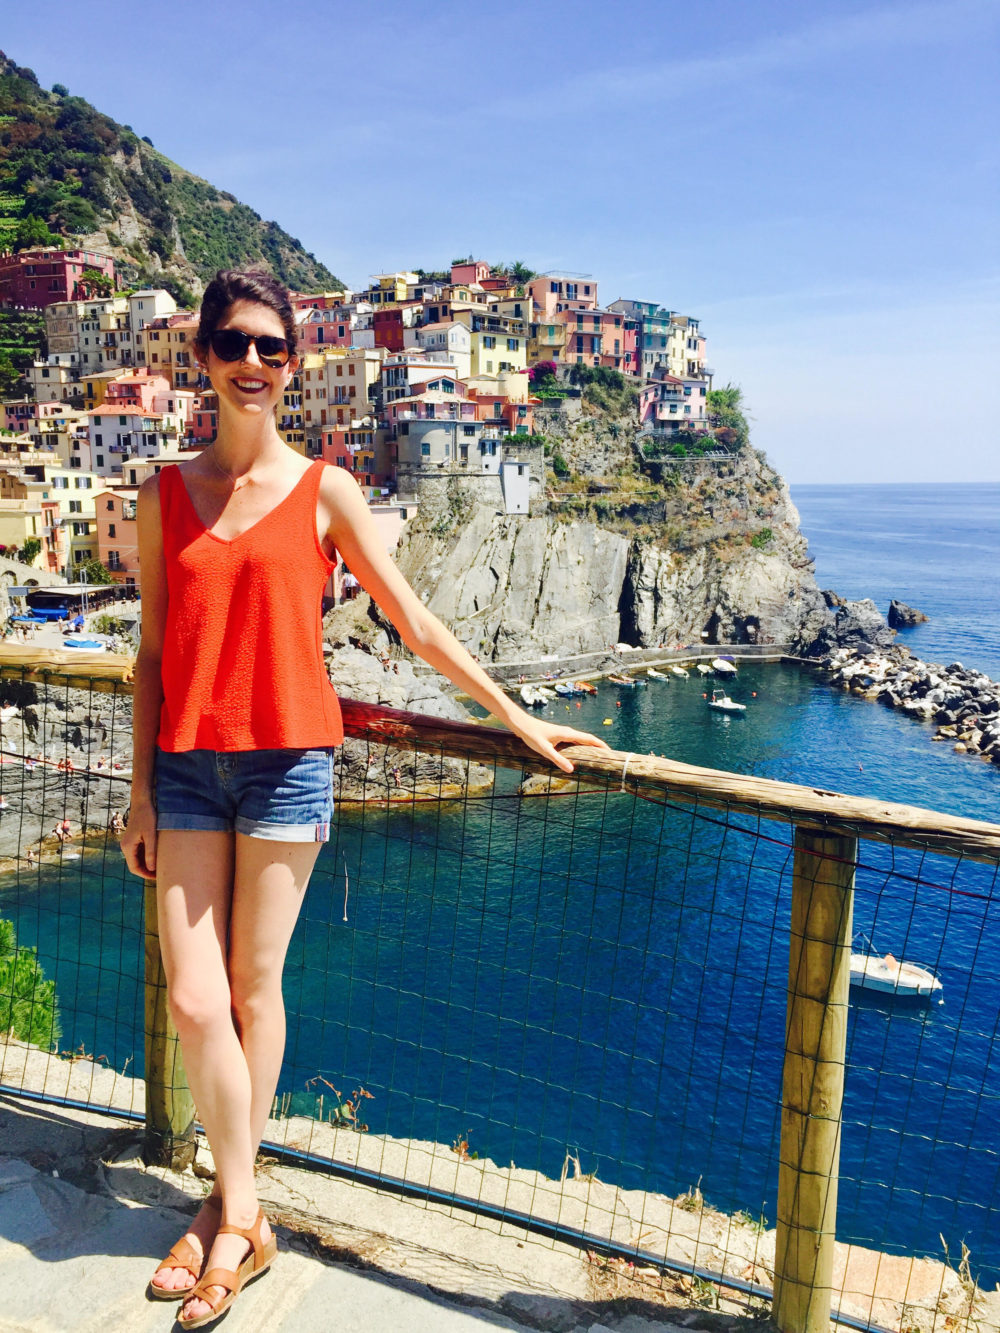 I Traveled To 20+ Countries In 2 Years. Here's How I Did It On A Tight Budget